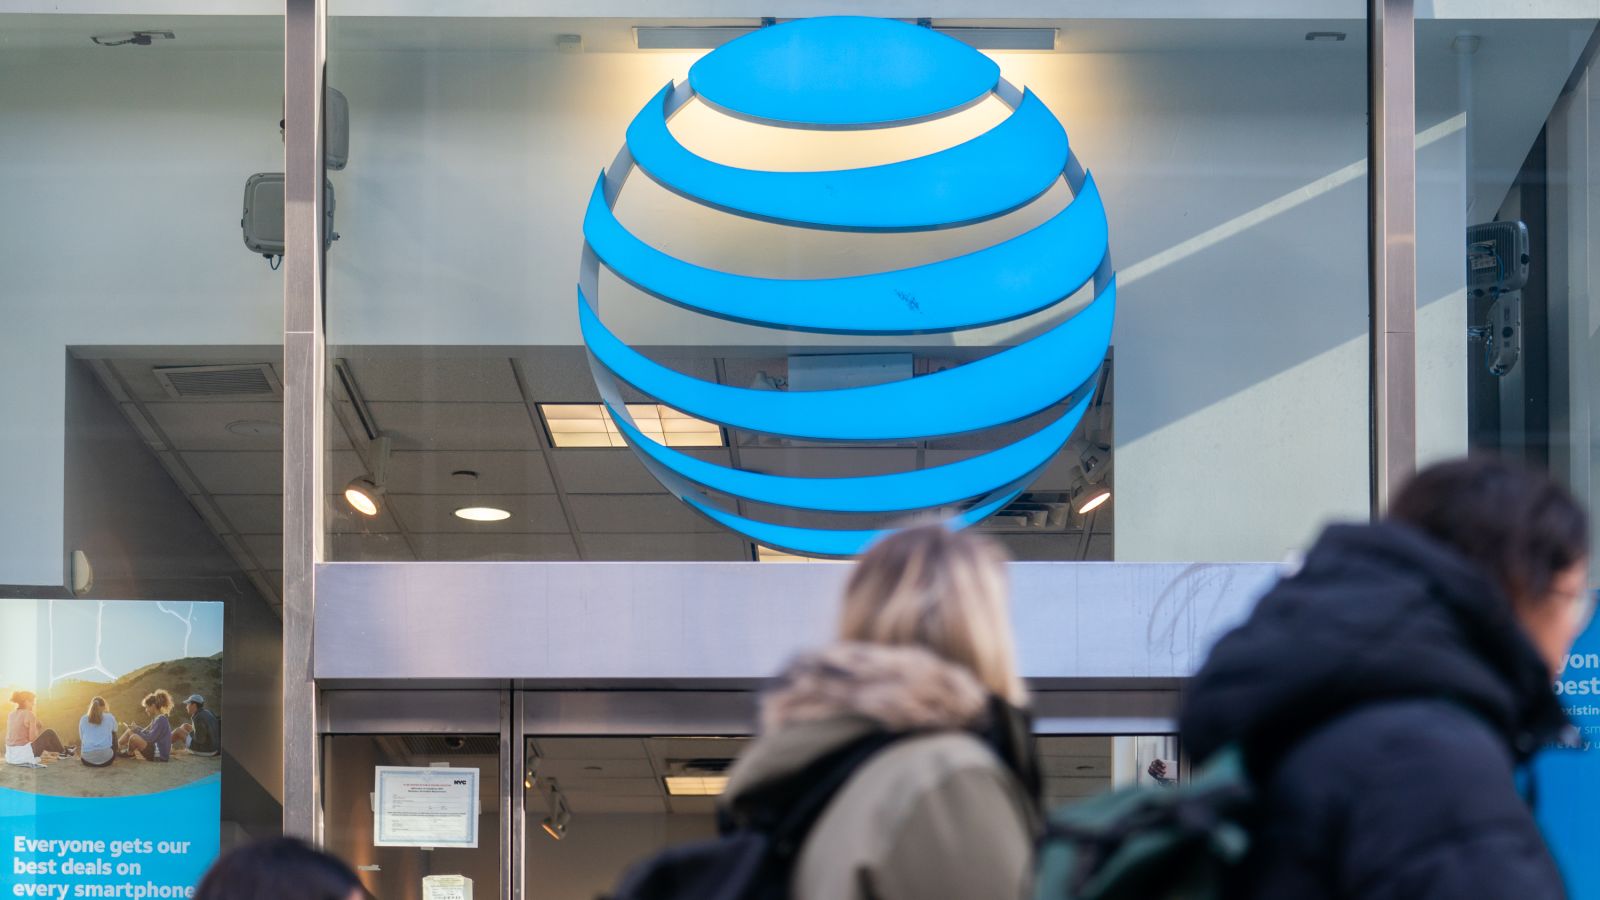 AT&T is investigating the leak of personal data of 73 million account holders in the United States